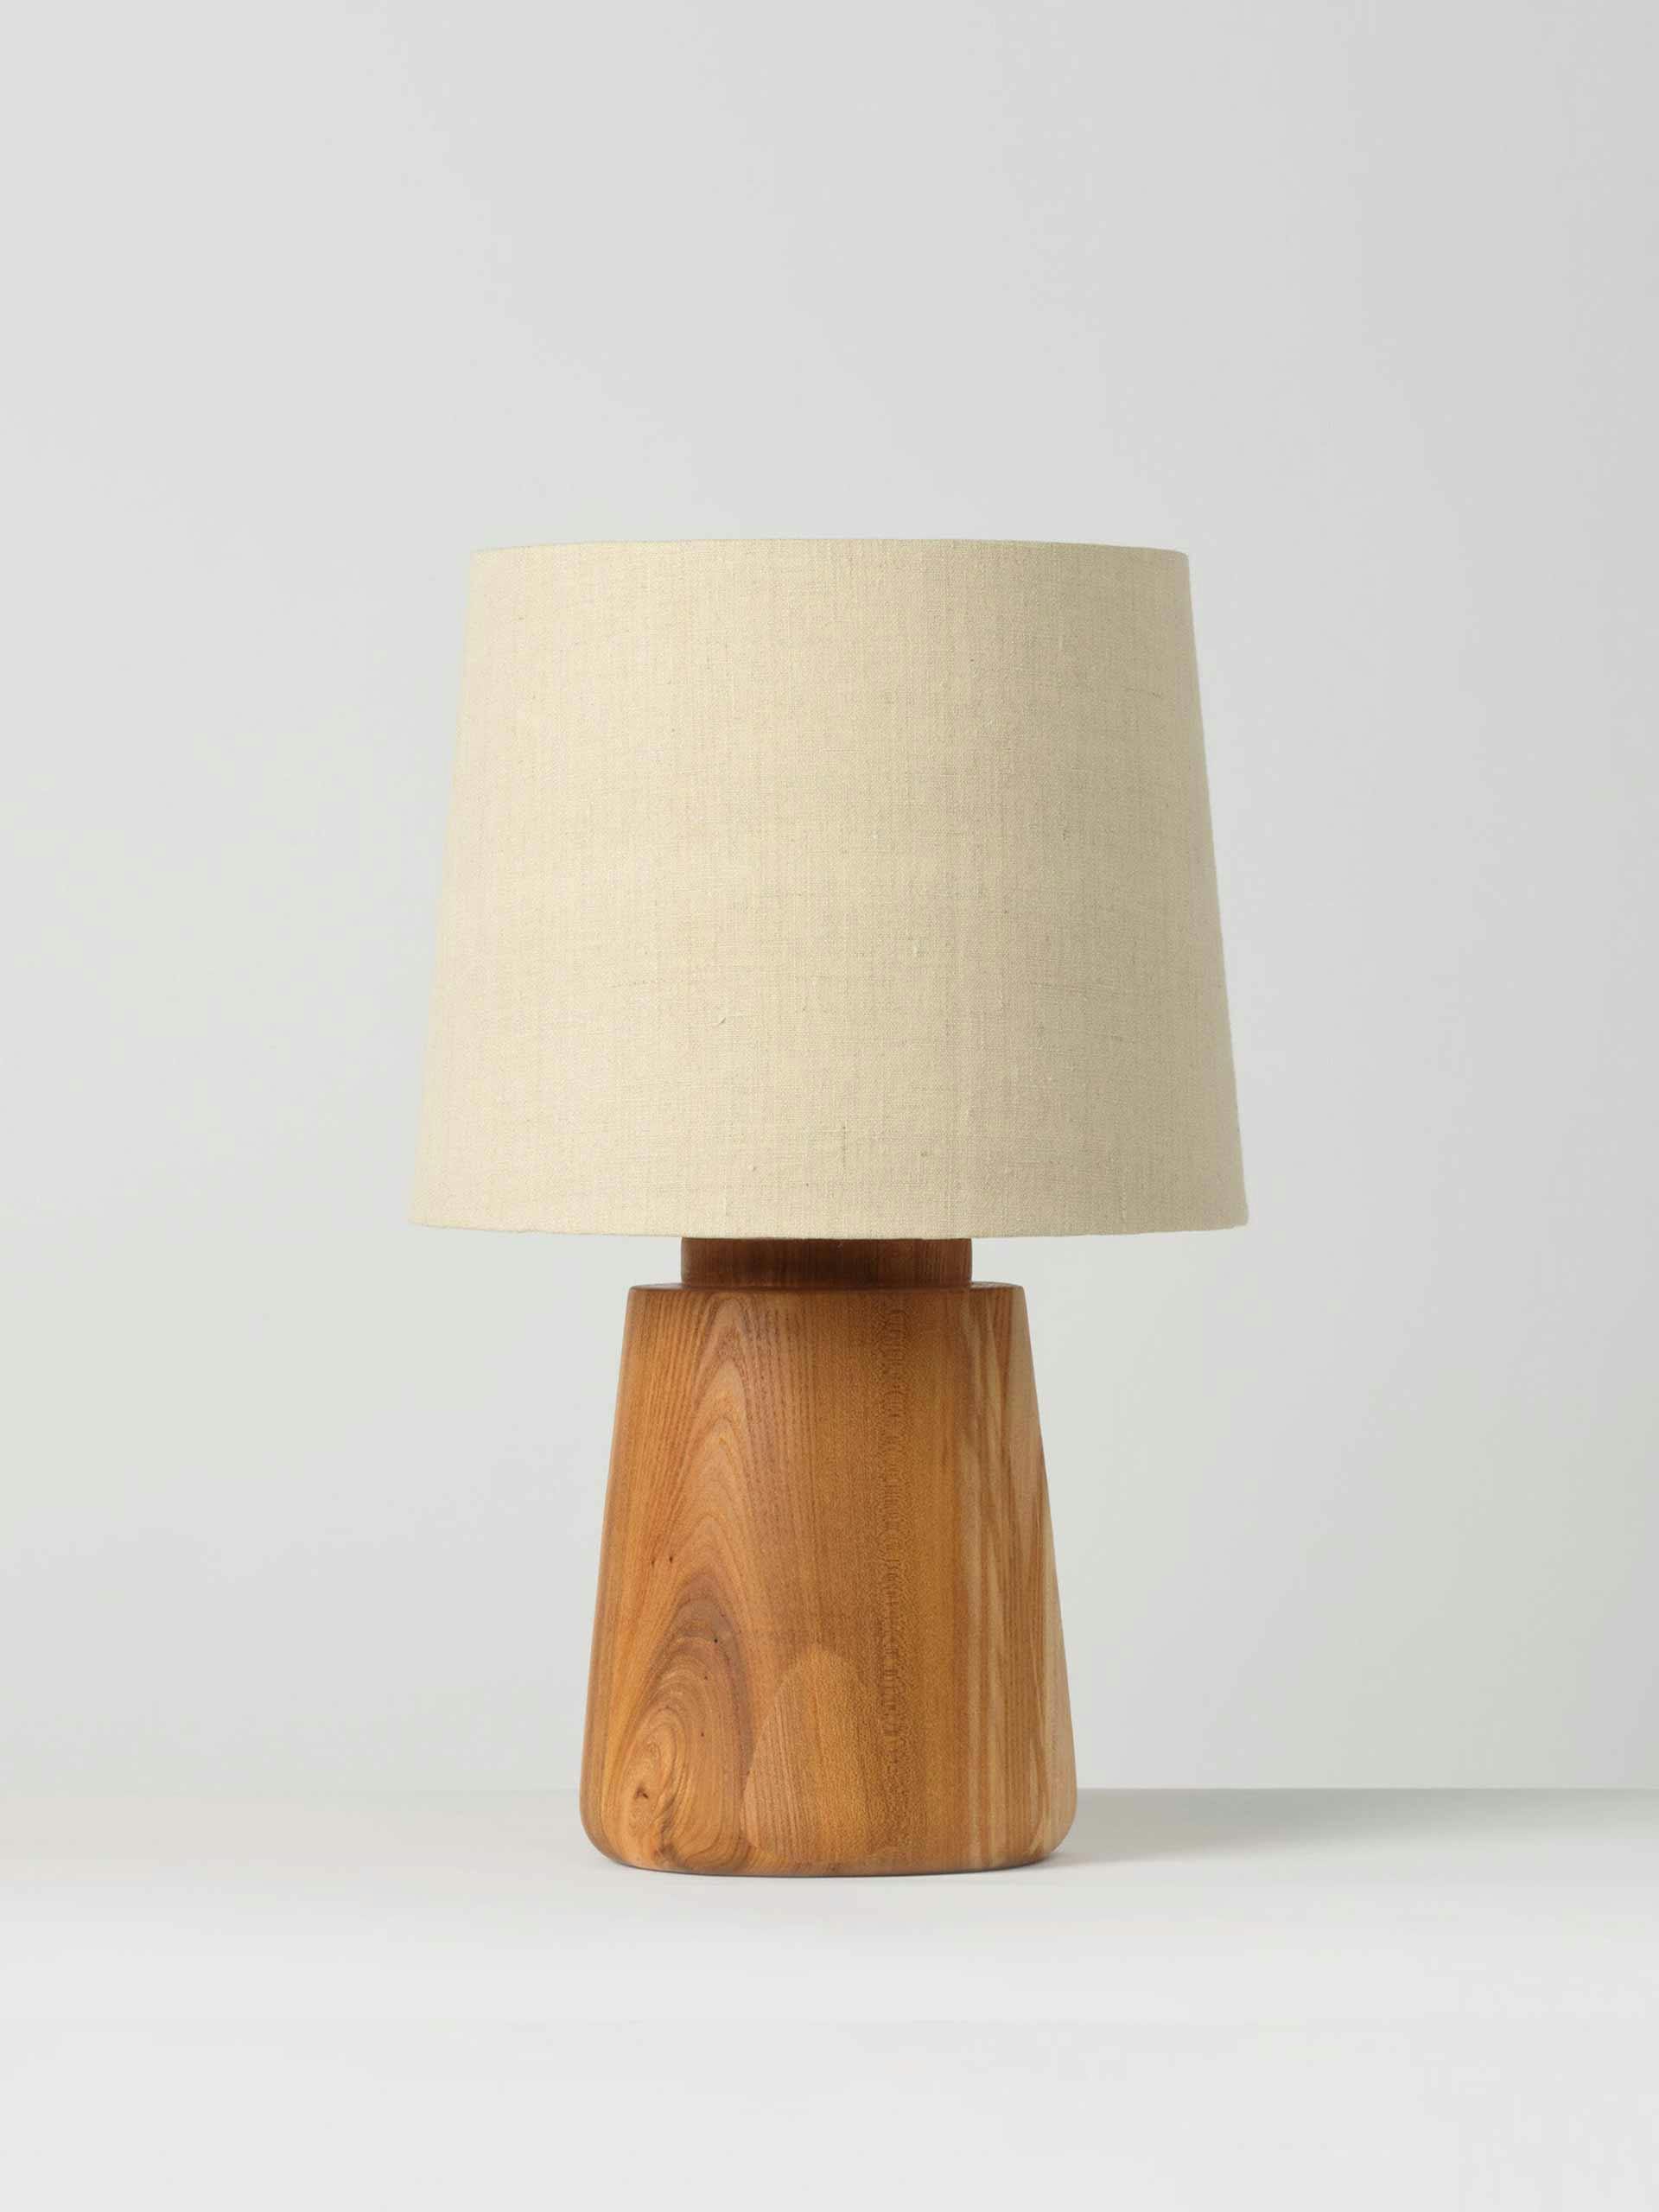 House table lamp